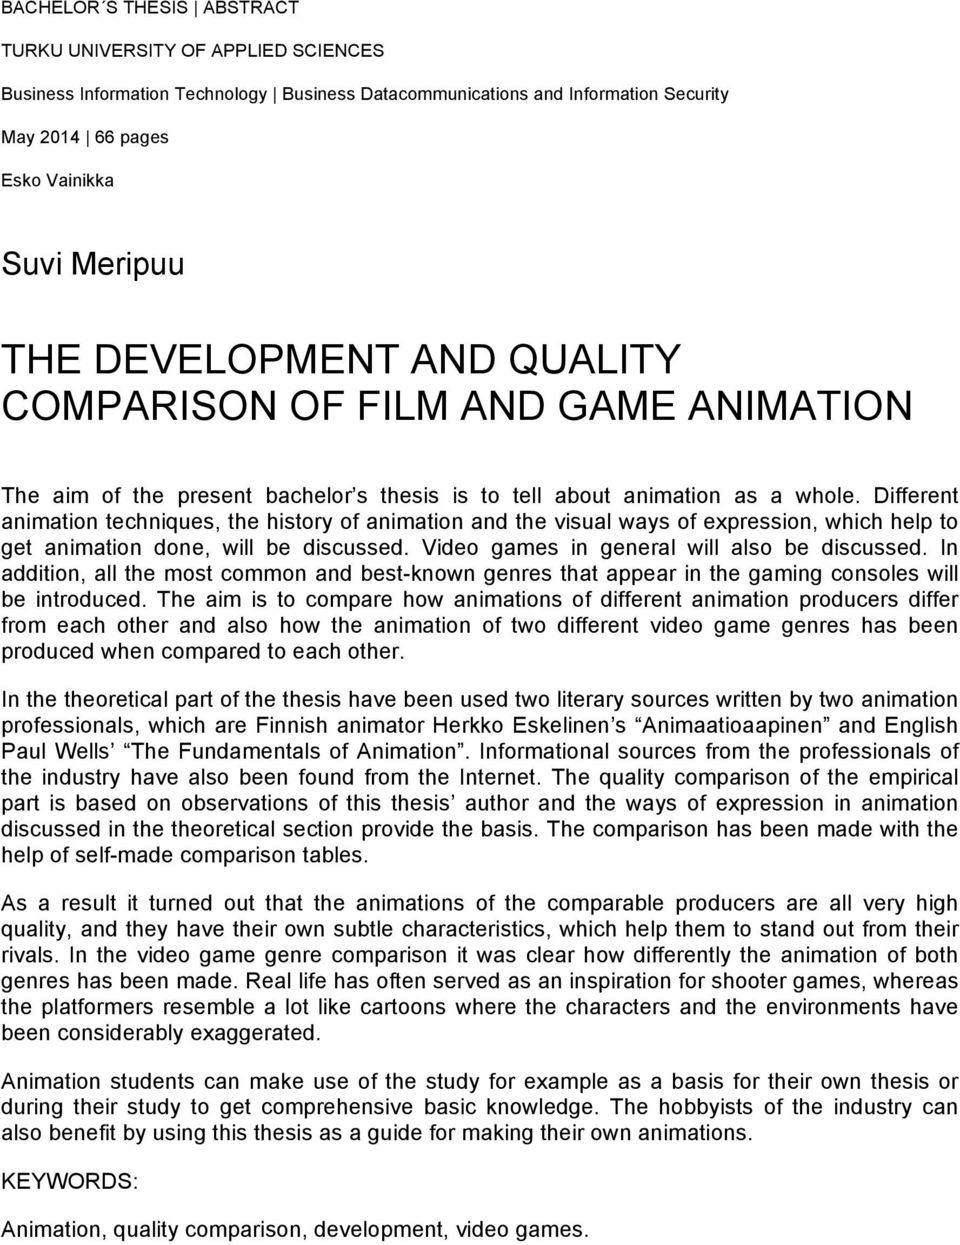 Different animation techniques, the history of animation and the visual ways of expression, which help to get animation done, will be discussed. Video games in general will also be discussed.